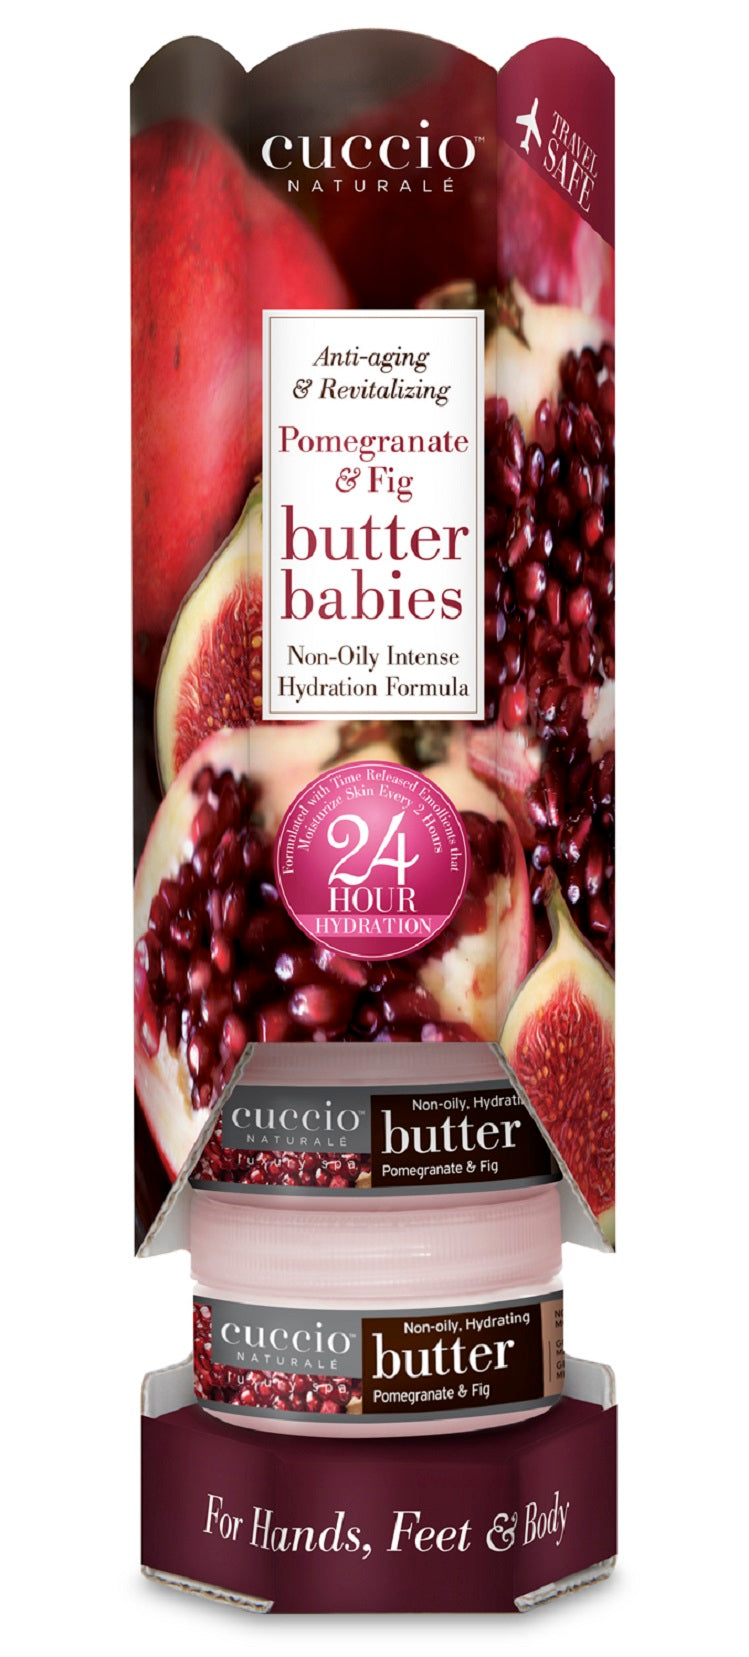 Body Butter Babies Pomegranate & Fig 6x42g Packung Cuccio